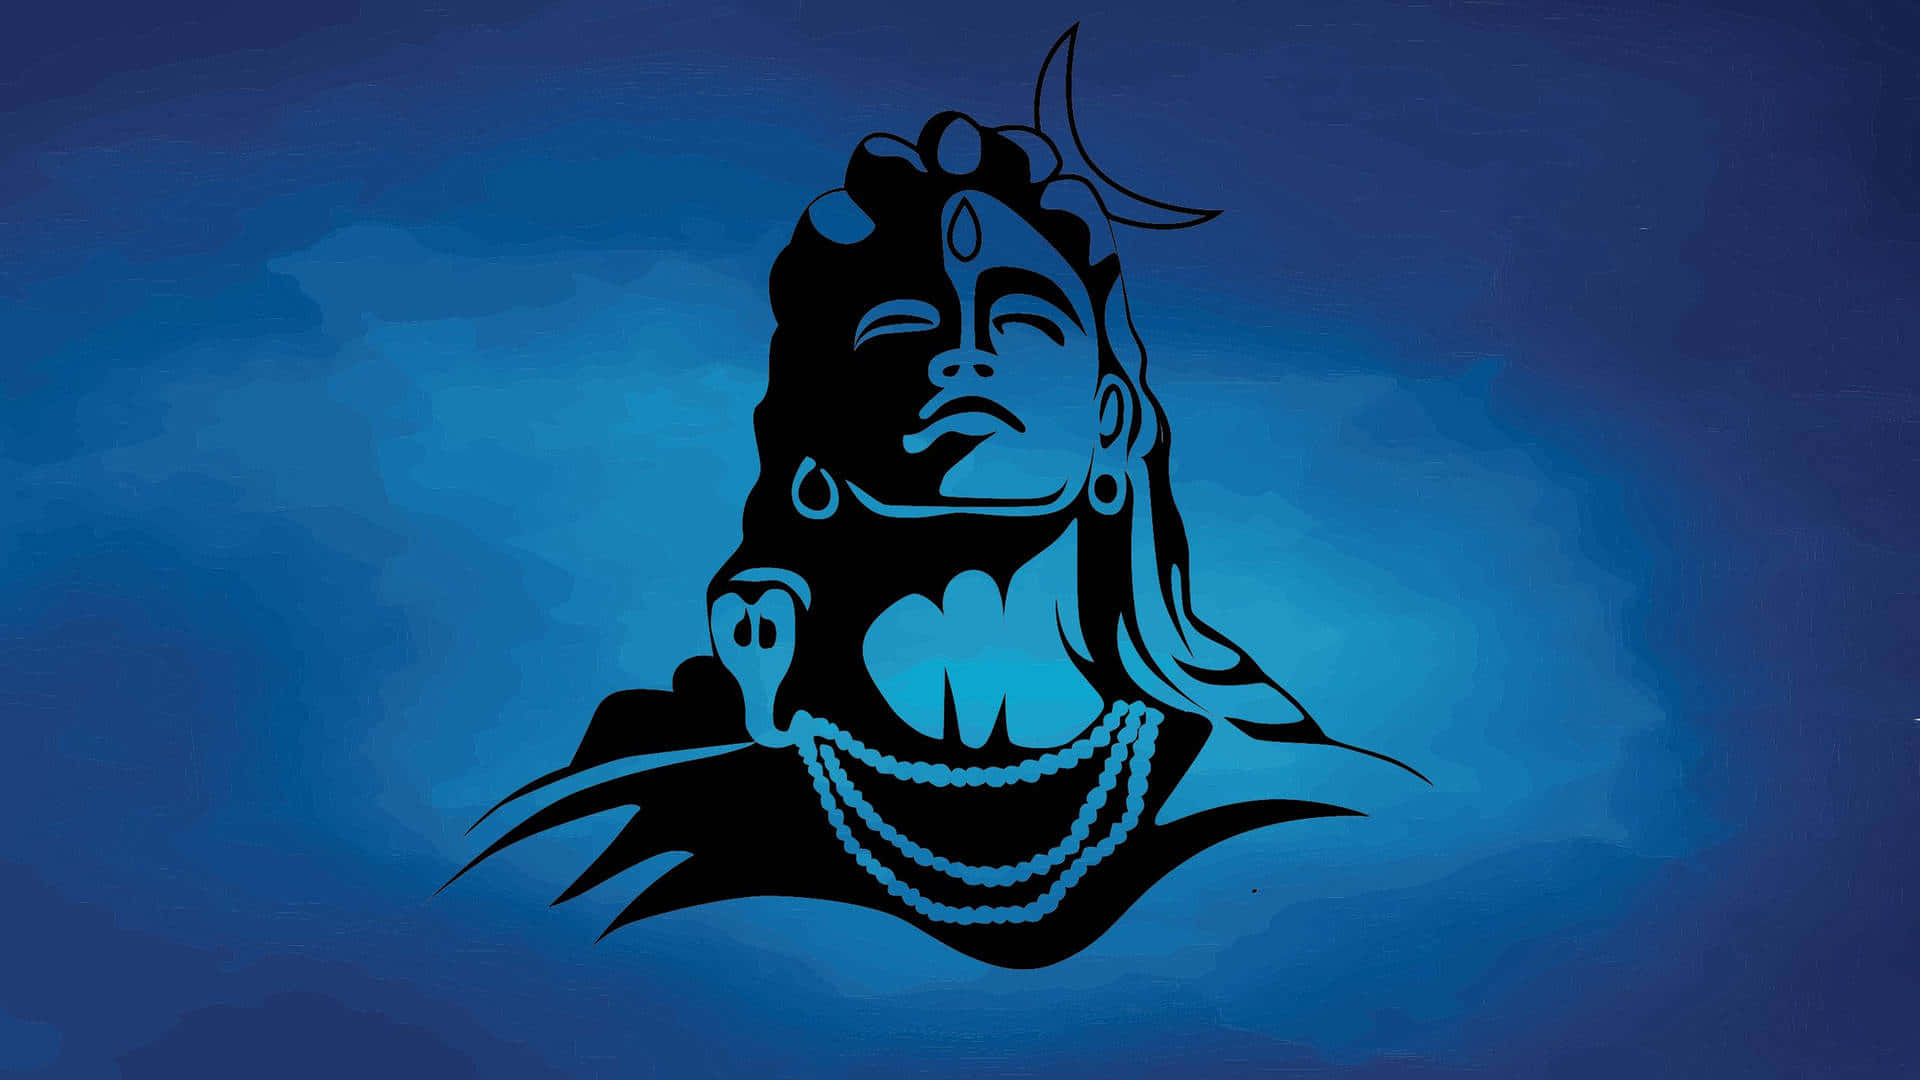 Find solace in the sacred spirit of Lord Mahadev